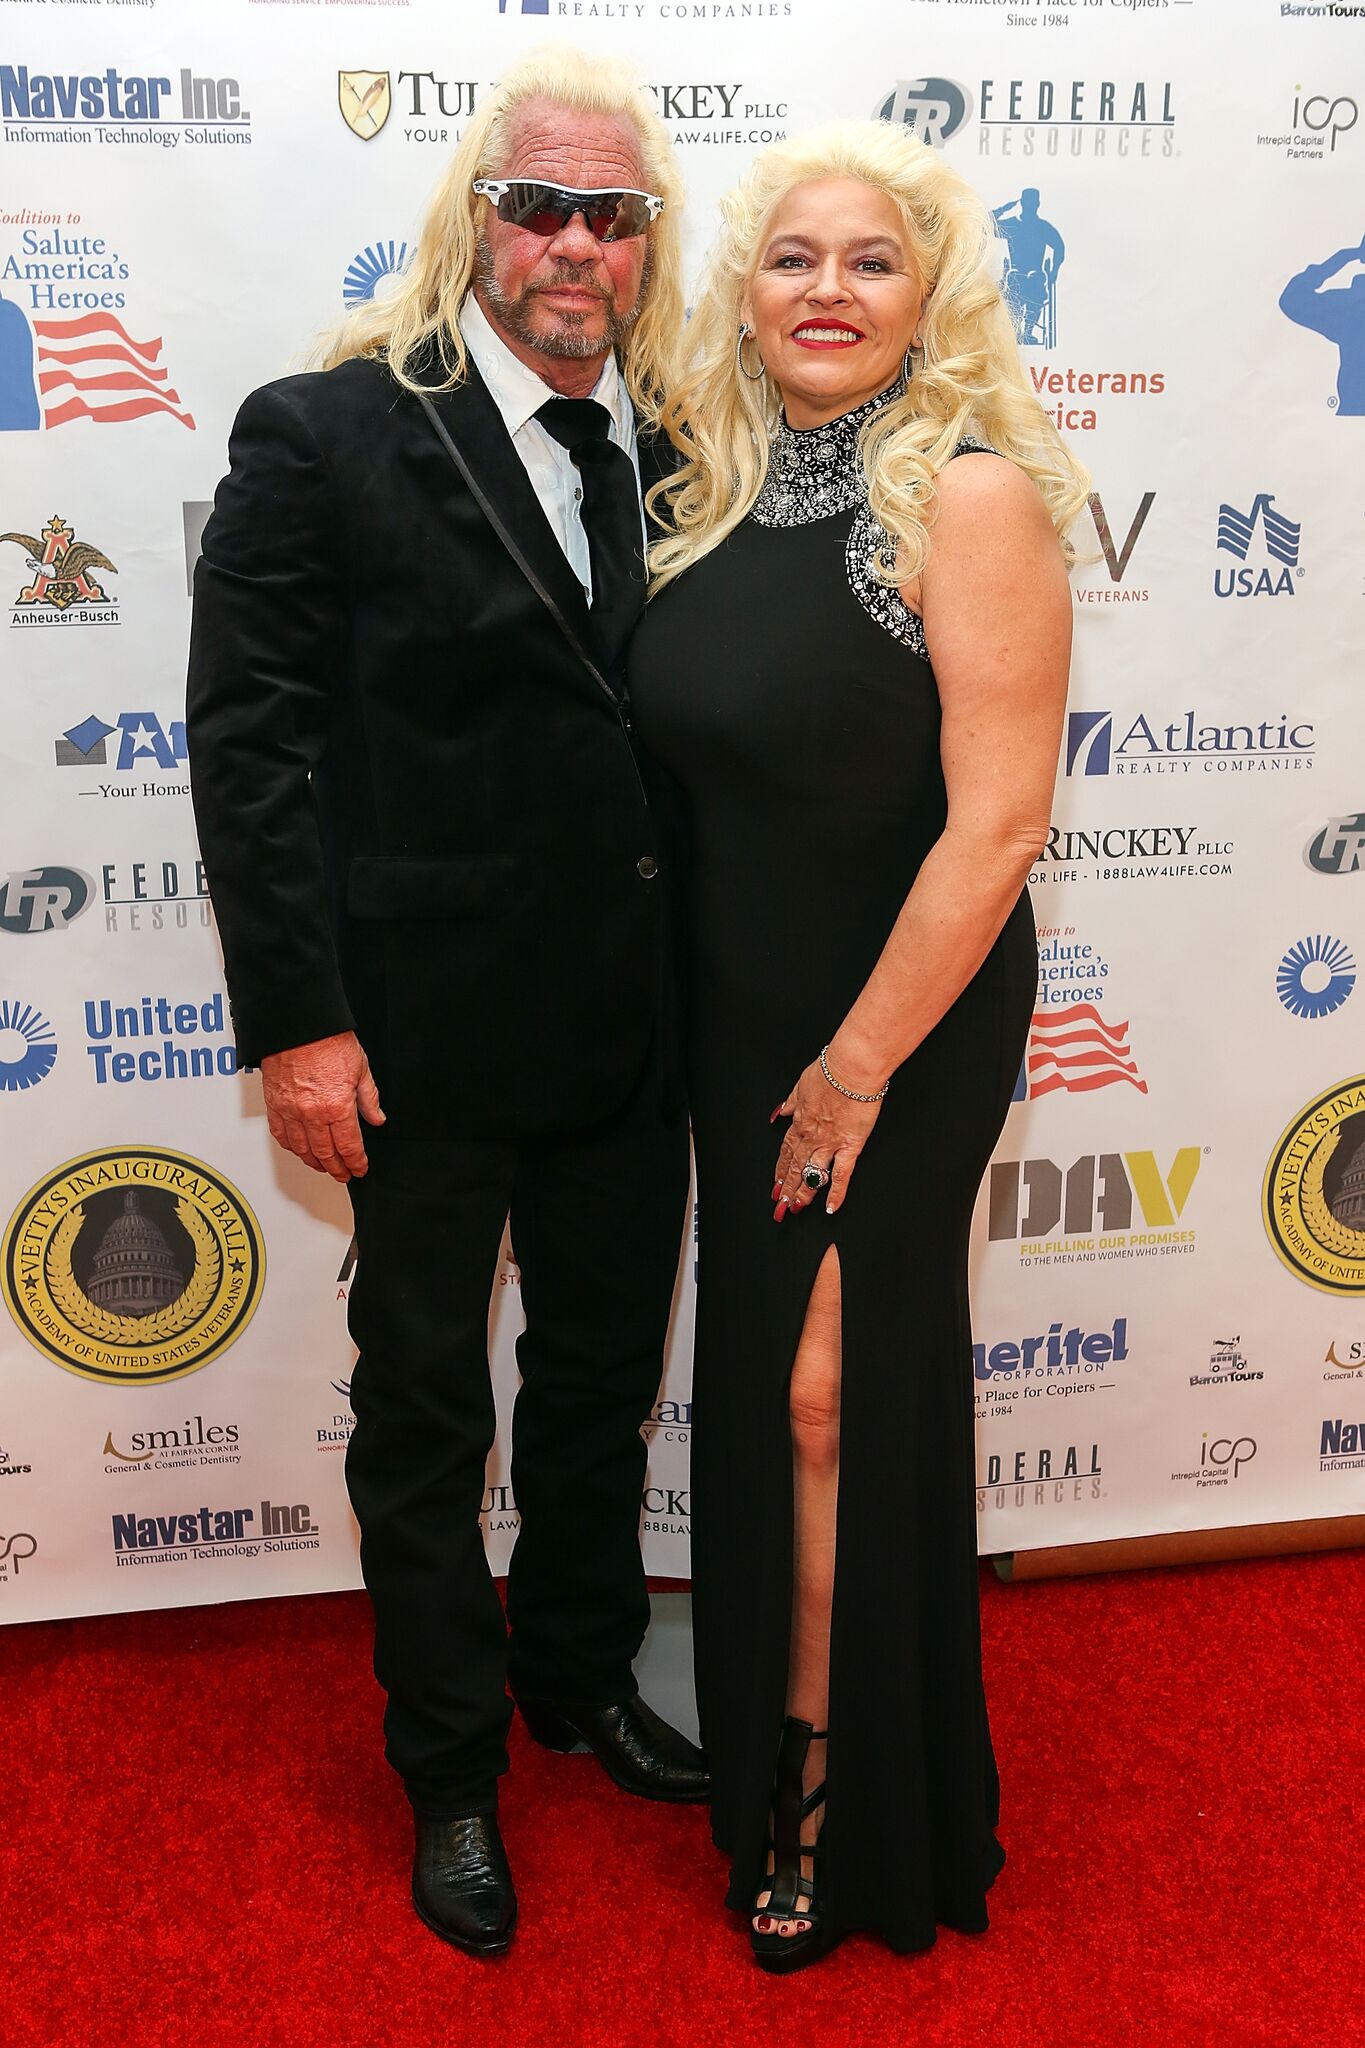 Duane 'Dog the Bounty Hunter" Chapman (L) and Beth Chapman attend the Vettys Presidential Inaugural Ball | Photo: Getty Images